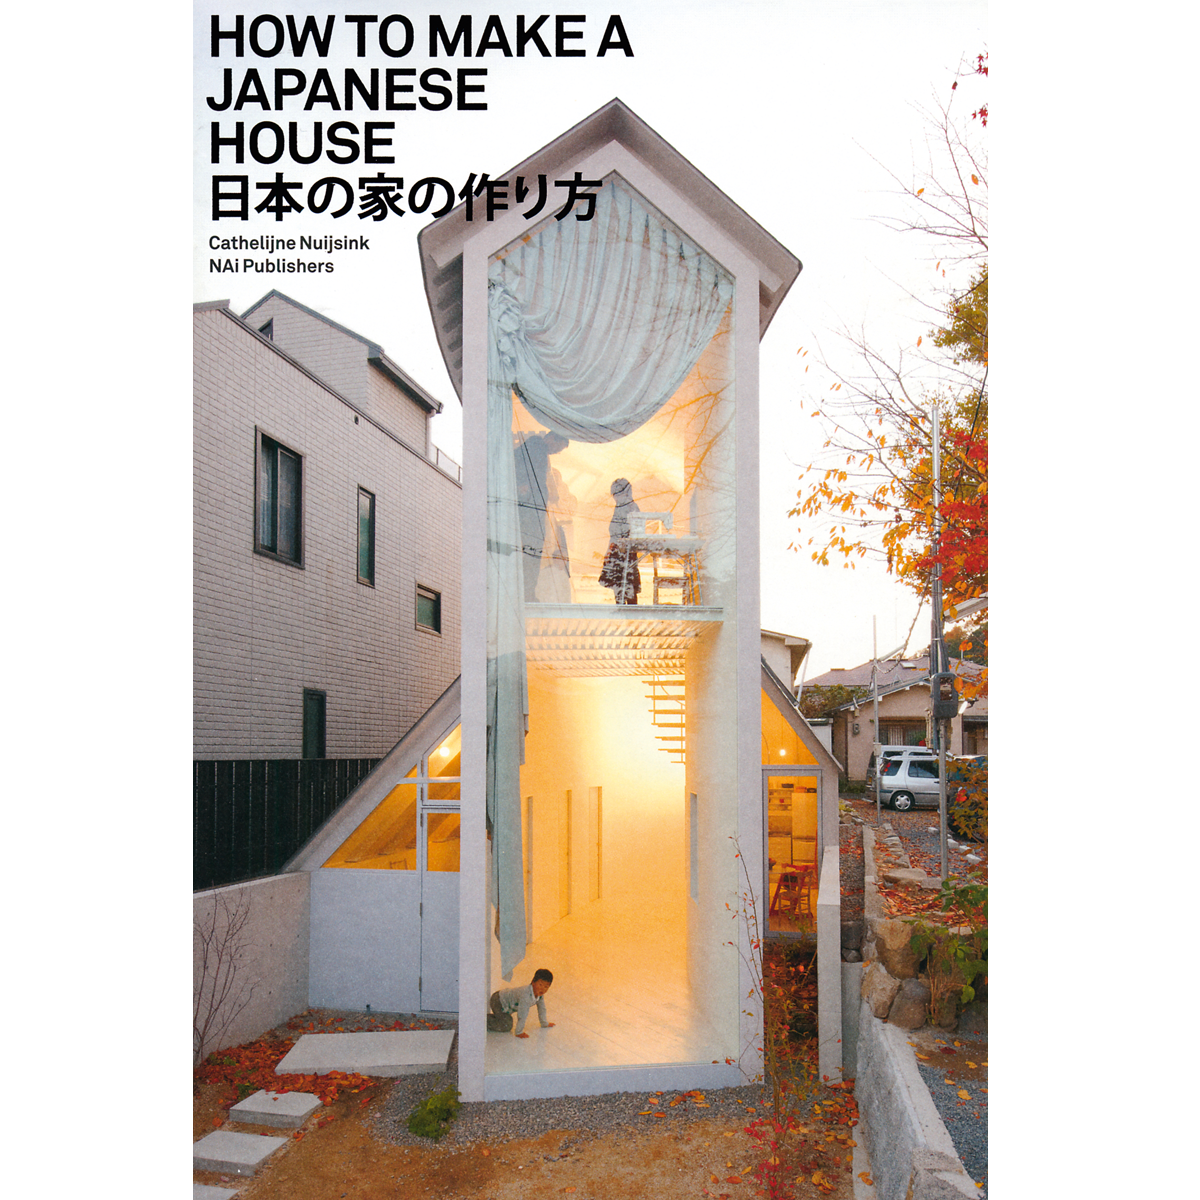 How to make a Japanese House